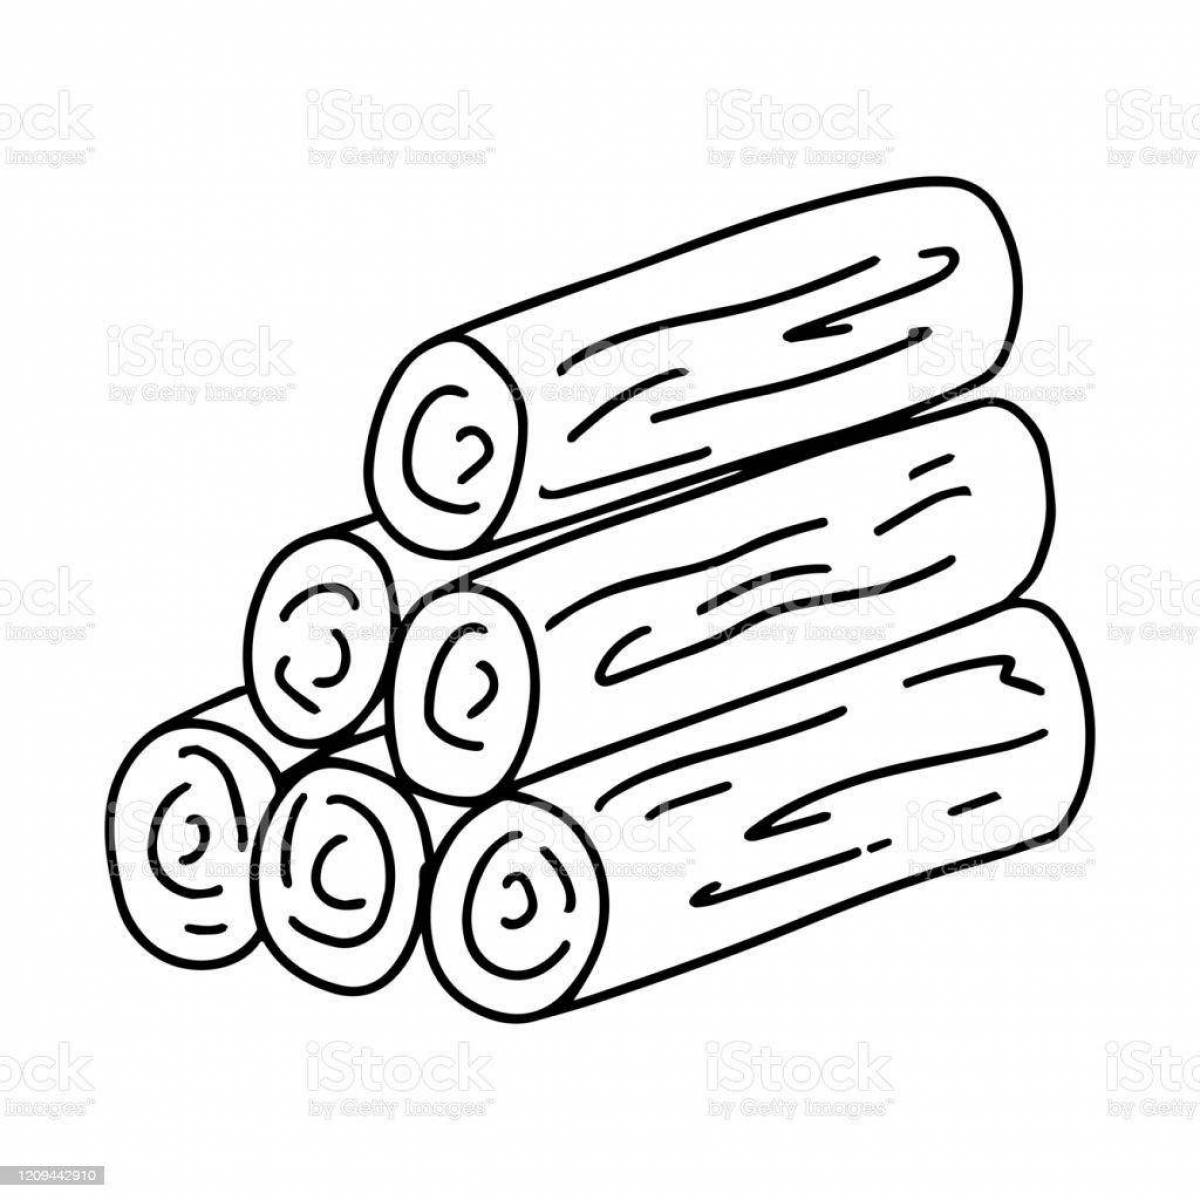 Playful firewood coloring page for kids